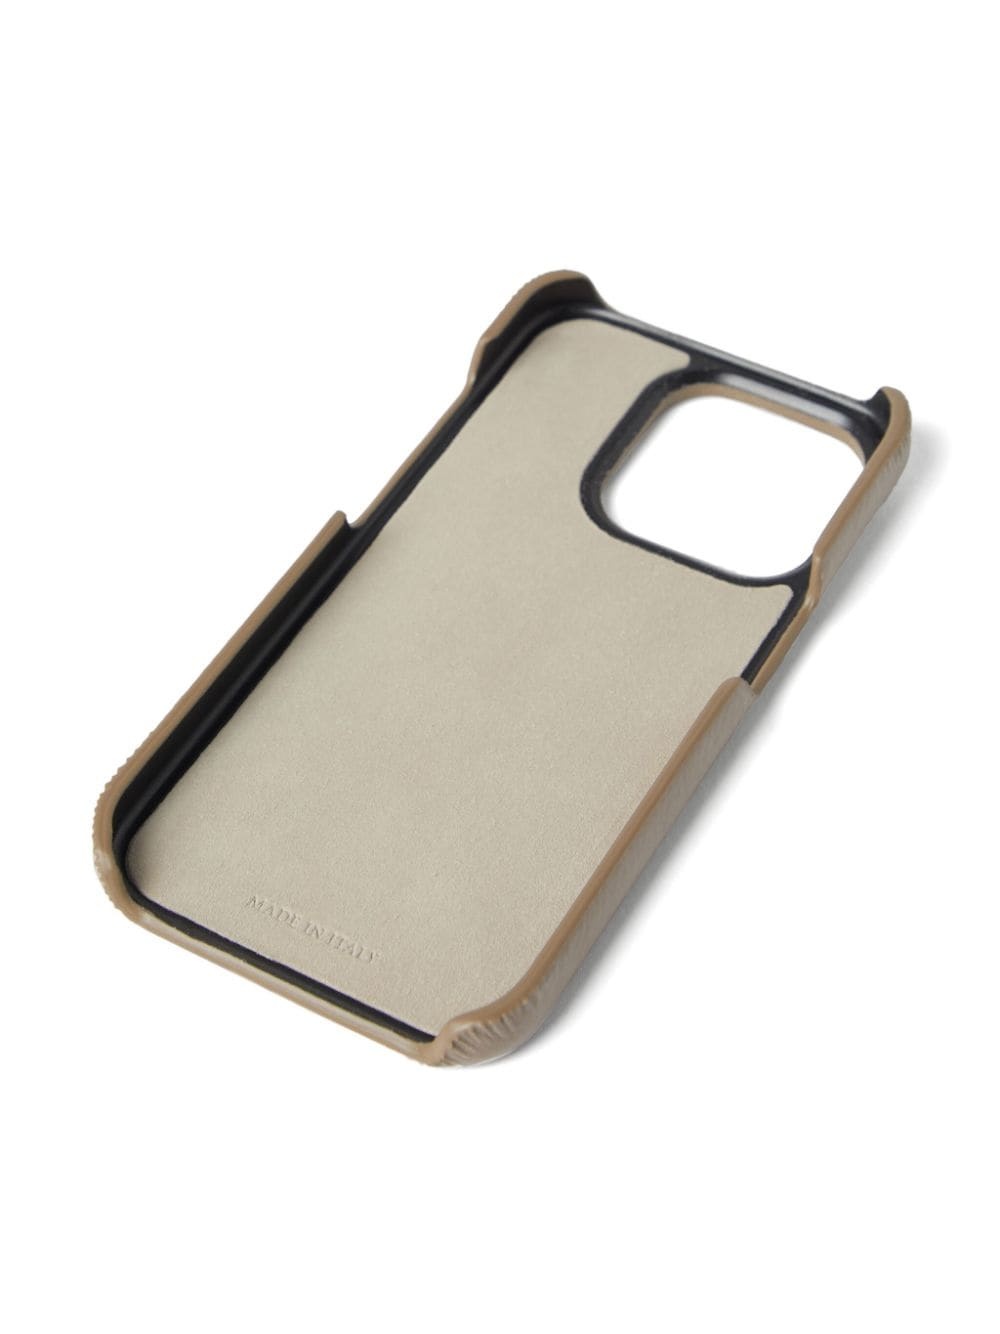 logo-debossed leather phone cover - 2